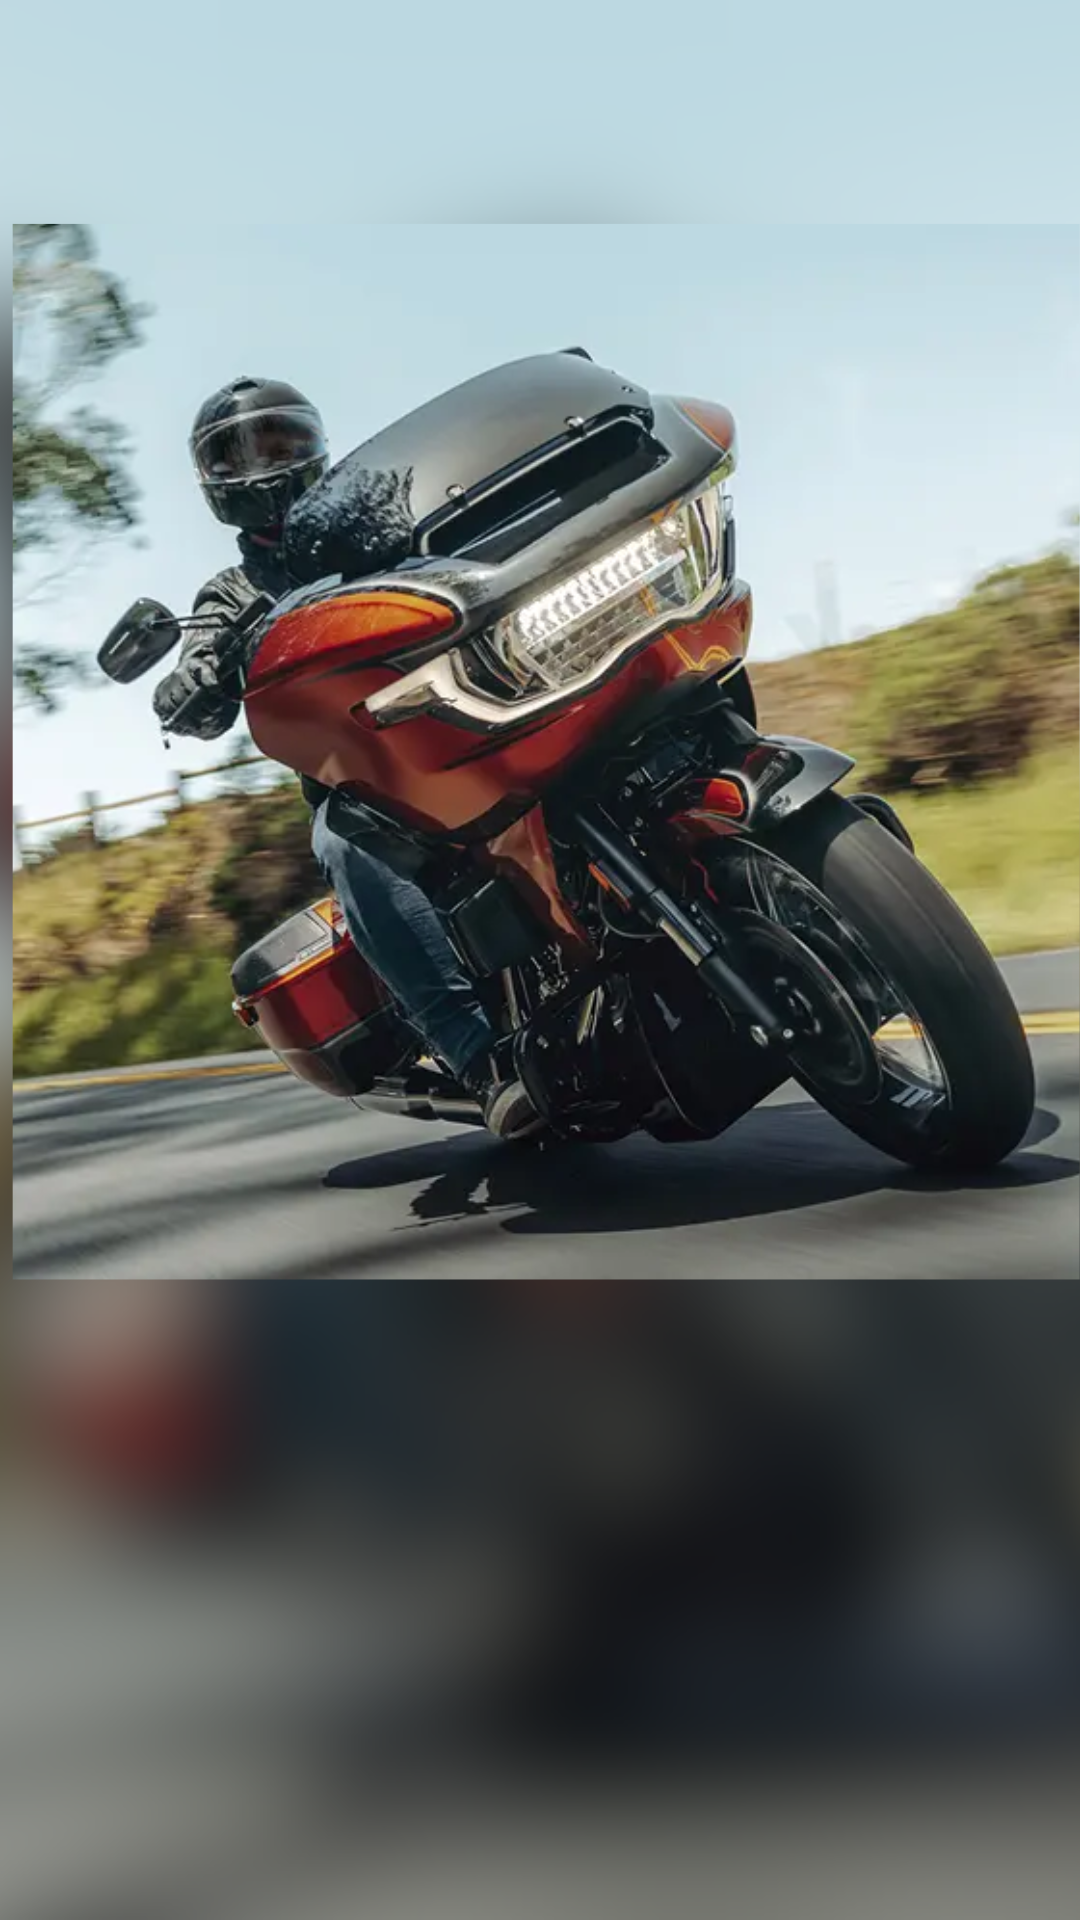 These Two Bikes Debut New Features For Harley-Davidson